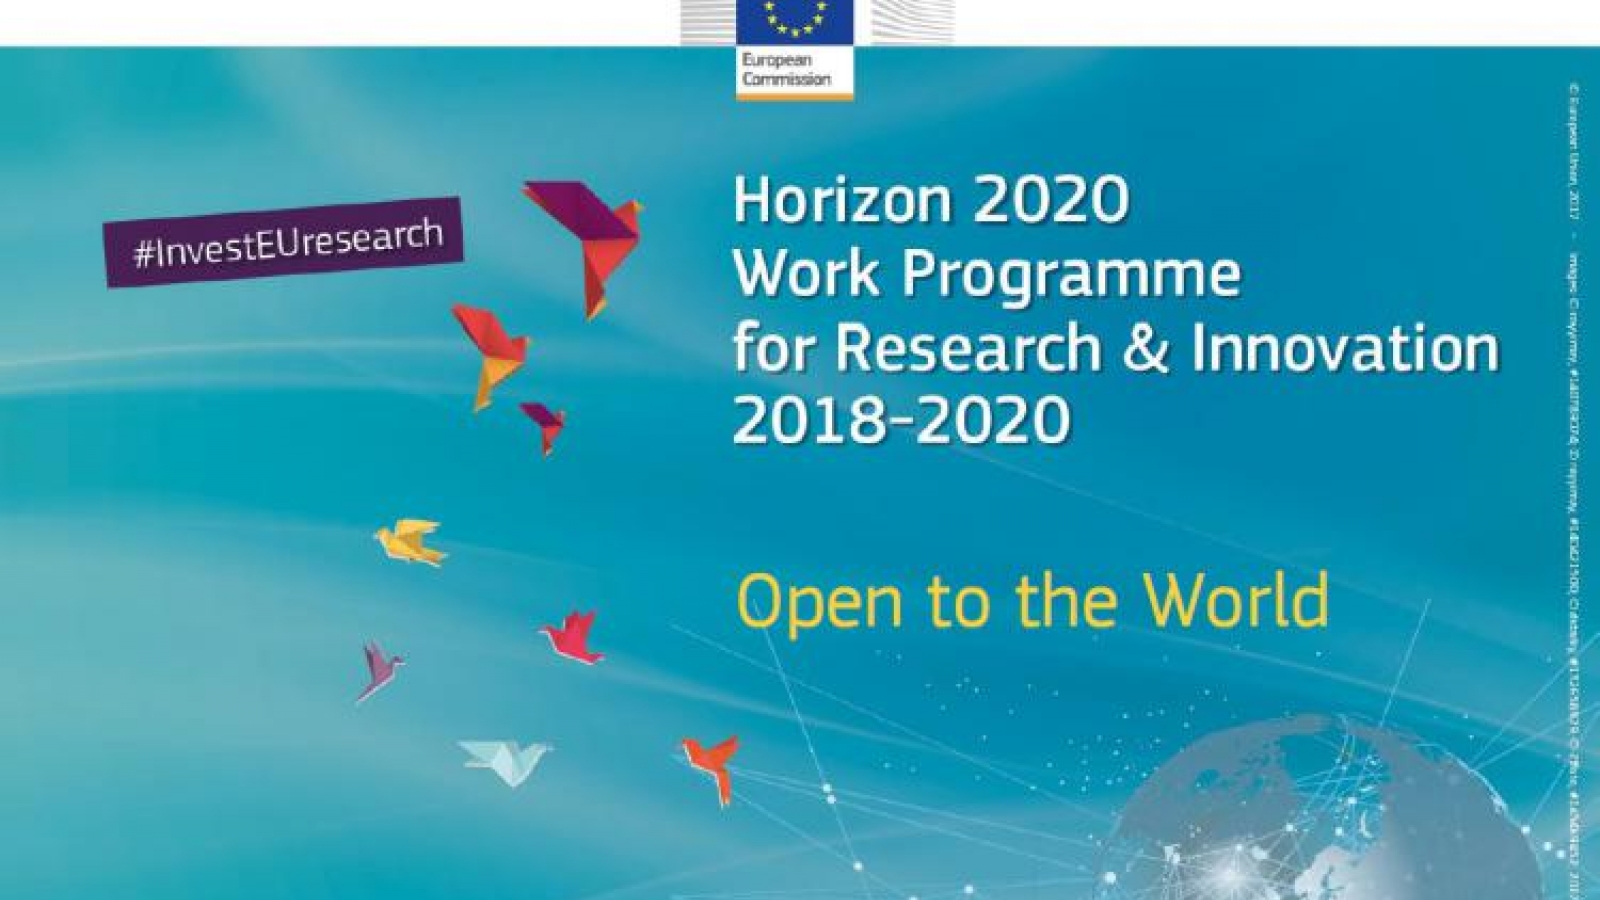 EU launches new Horizon 2020 Work Programme for Research & Innovation